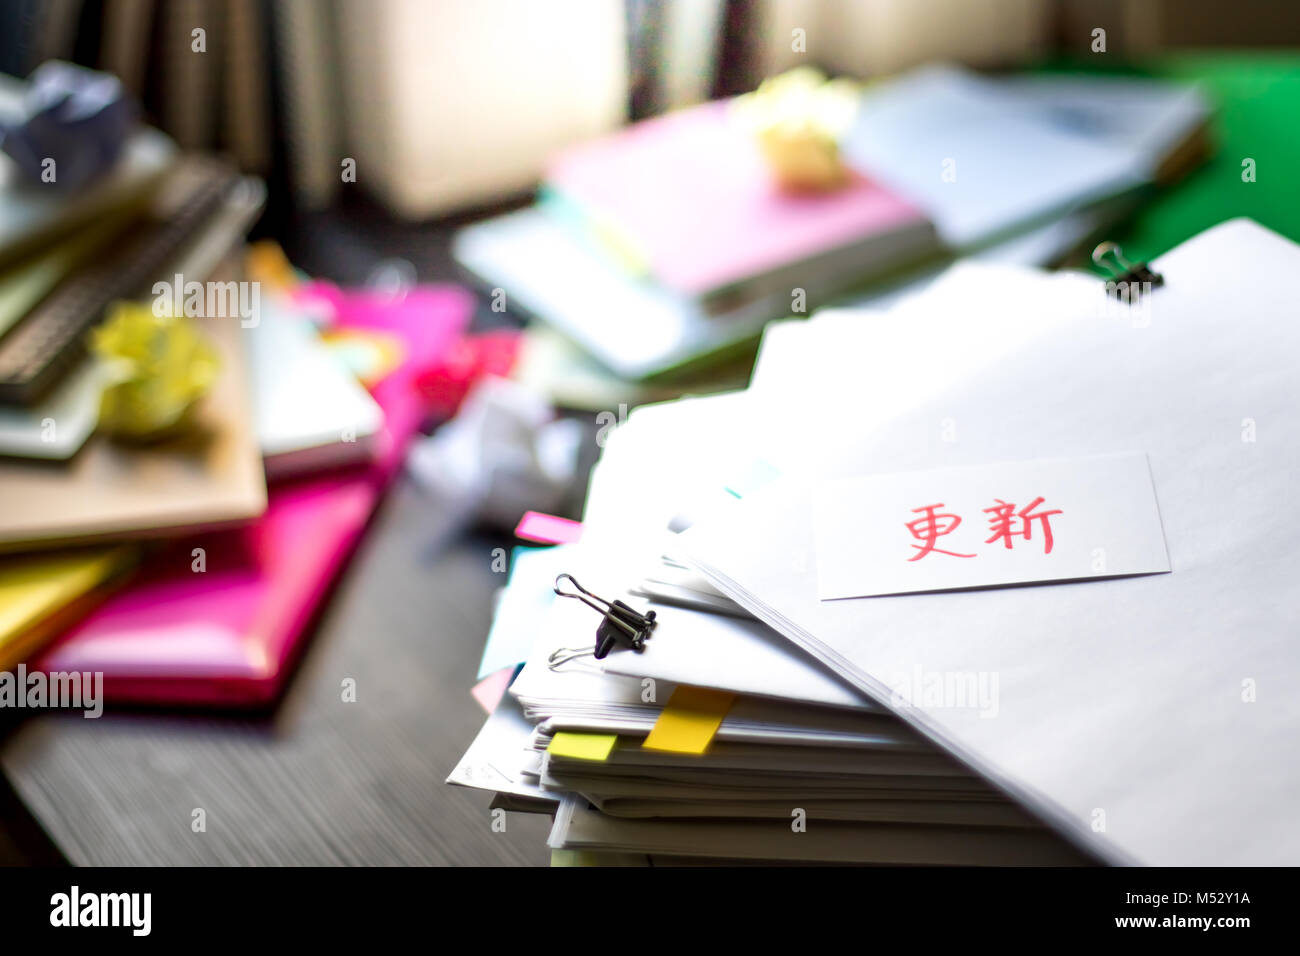 Renew; Stack of Documents. Working or Studying at messy desk. Stock Photo